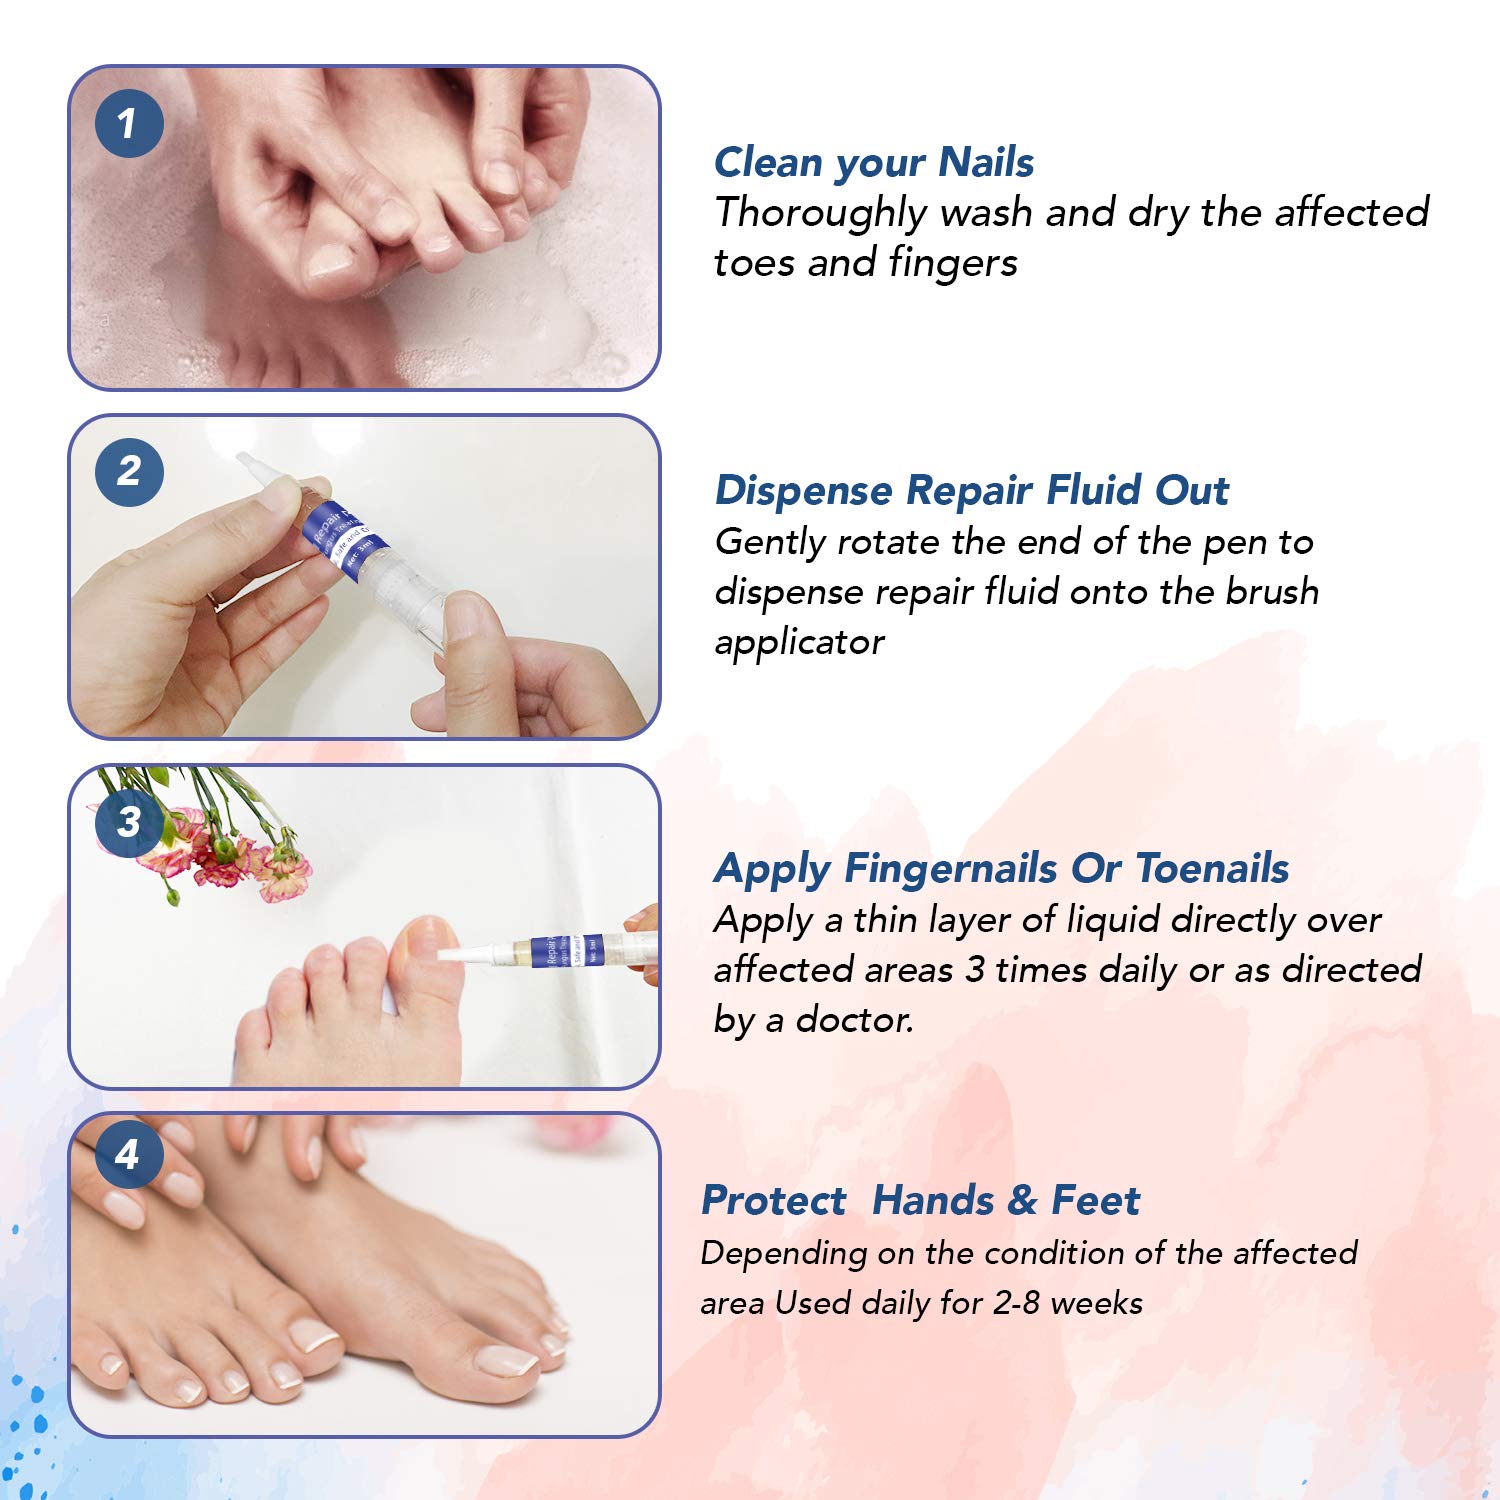 Unsightly Toenails and Fungal Infection | Weil Foot & Ankle Institute